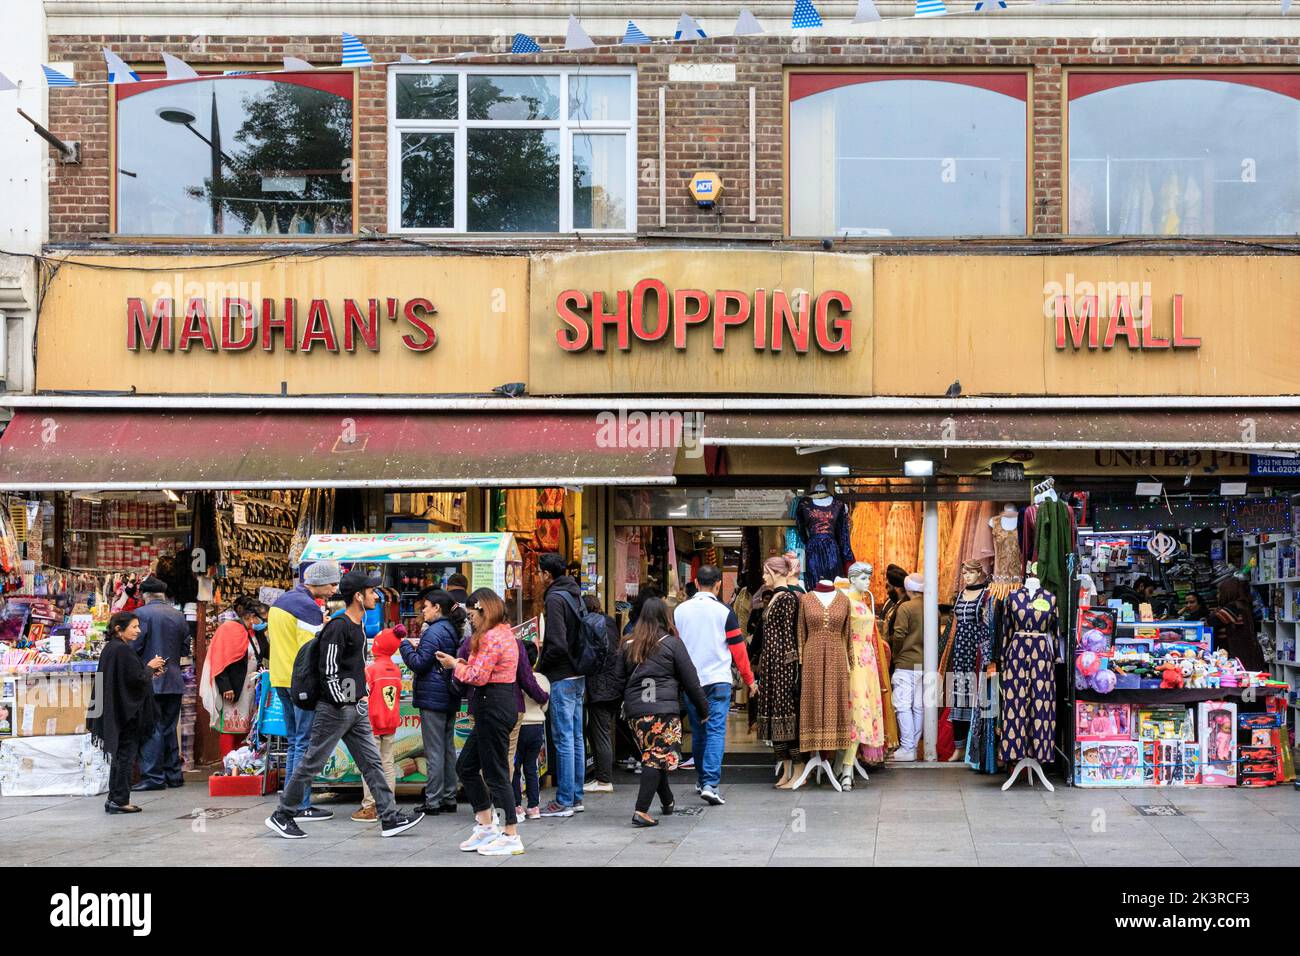 Madhan's Shopping Mall, Punjabi, Indian and Asian shops and people shopping in Southall High Street, Southall, West London, England, UK Stock Photo